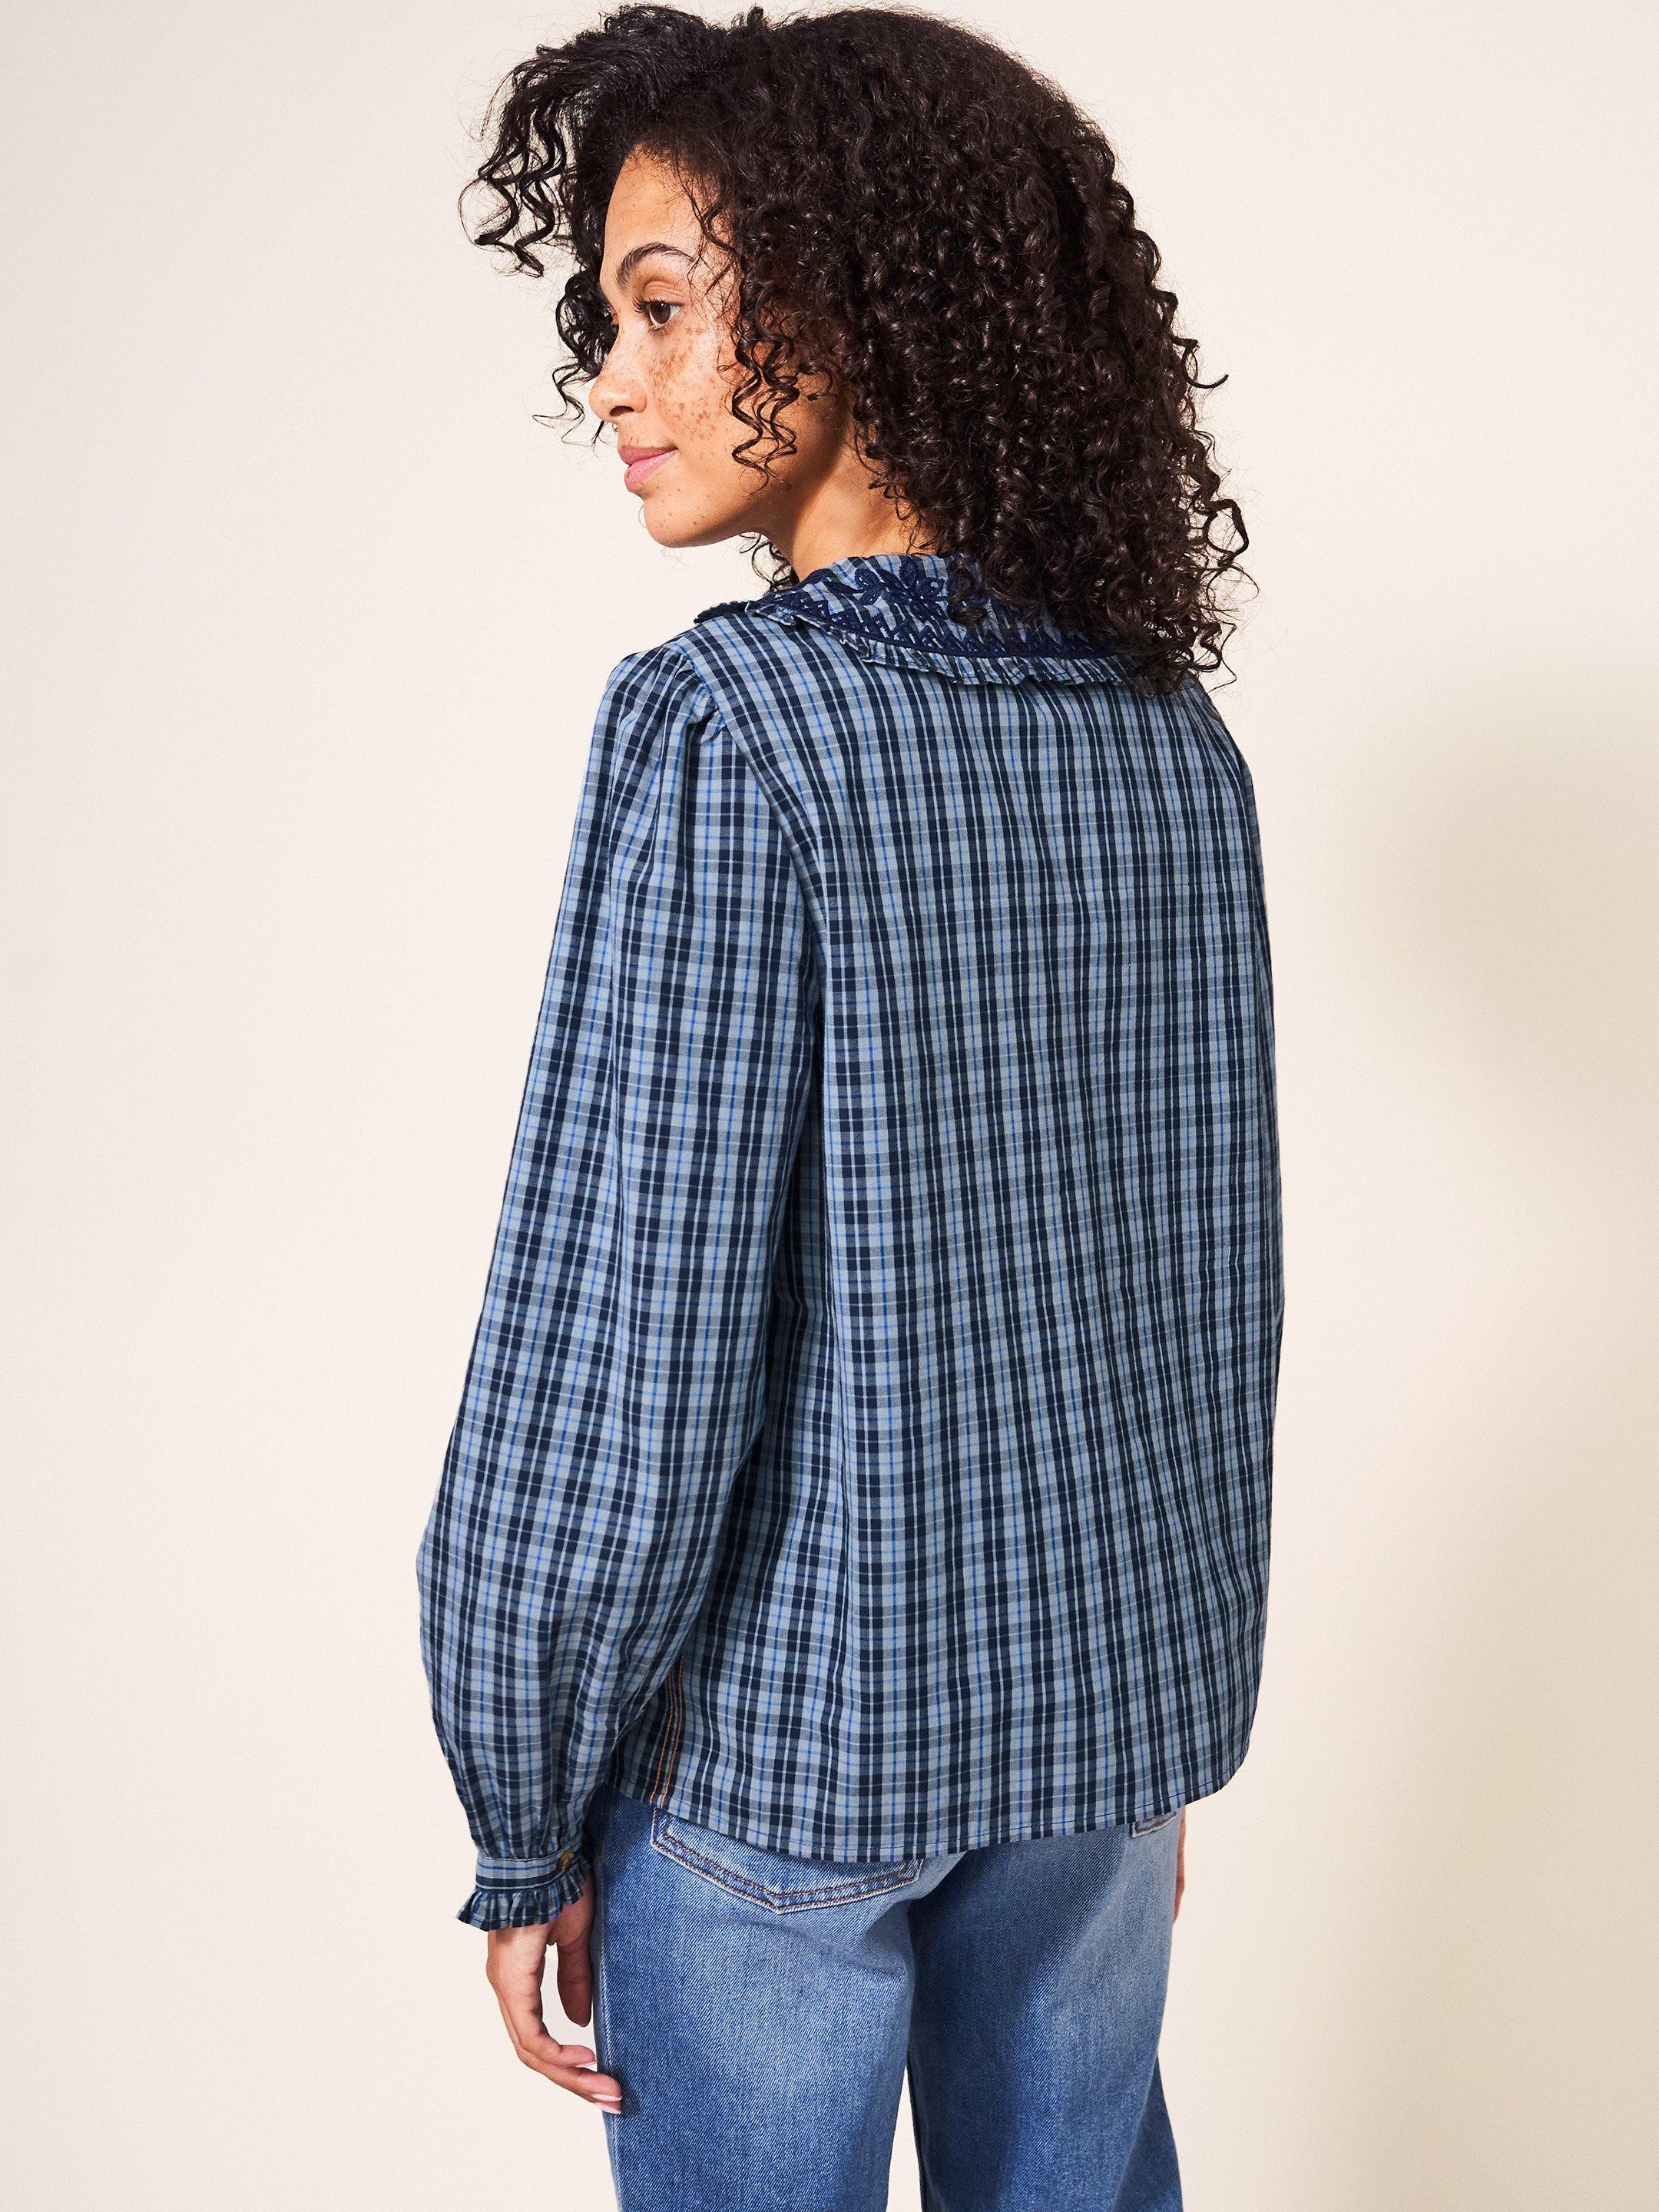 Darcy Embroidered Check Shirt in NAVY MULTI - MODEL BACK